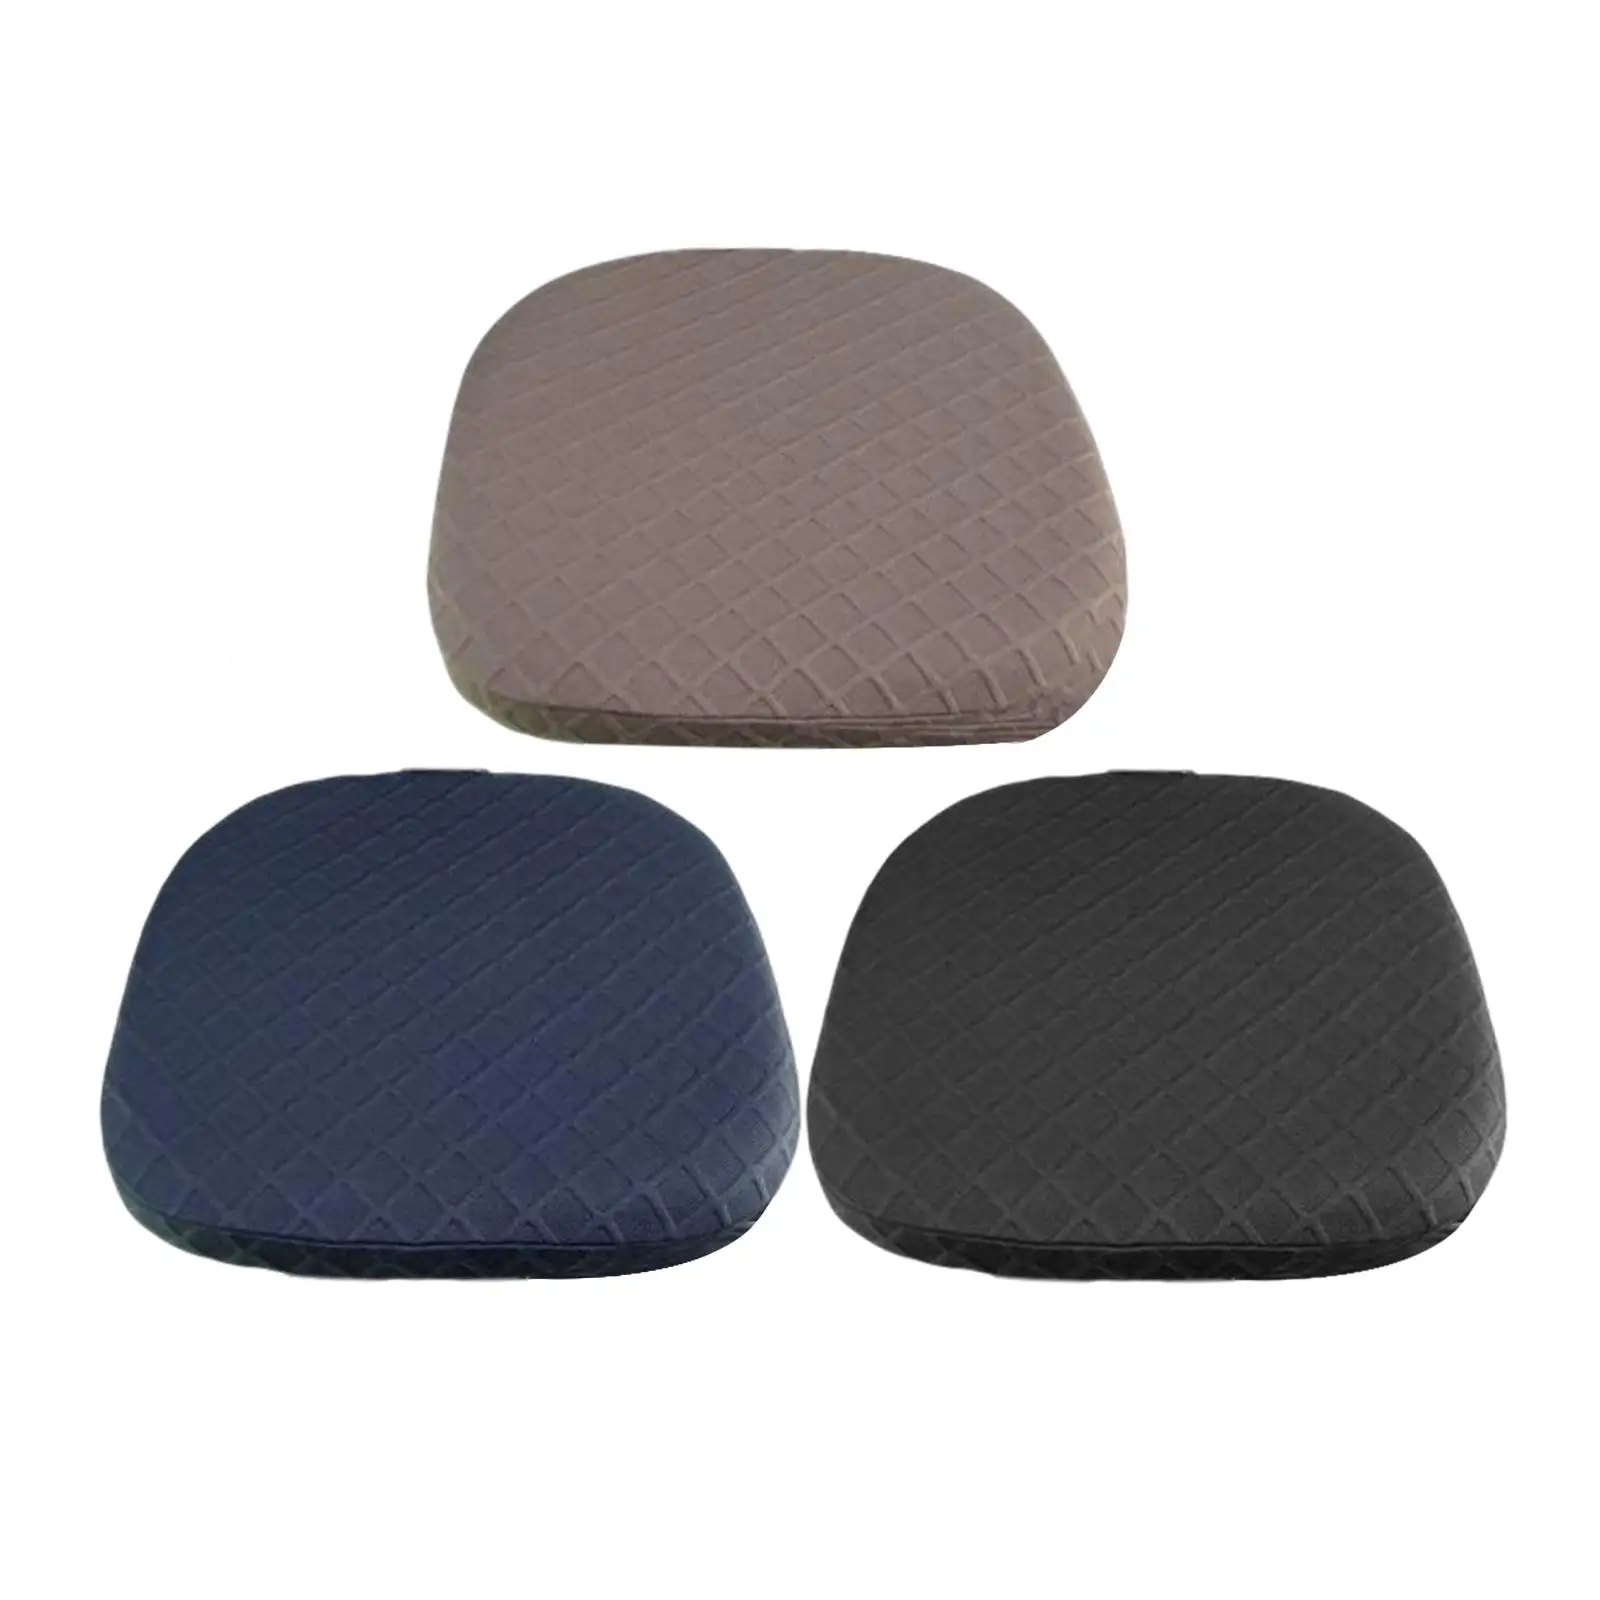 Stretchable Jacquard Office Chair Seat Cushion Cover Protector Flexible for Office Workers Solid Pattern Anti Slip Removable